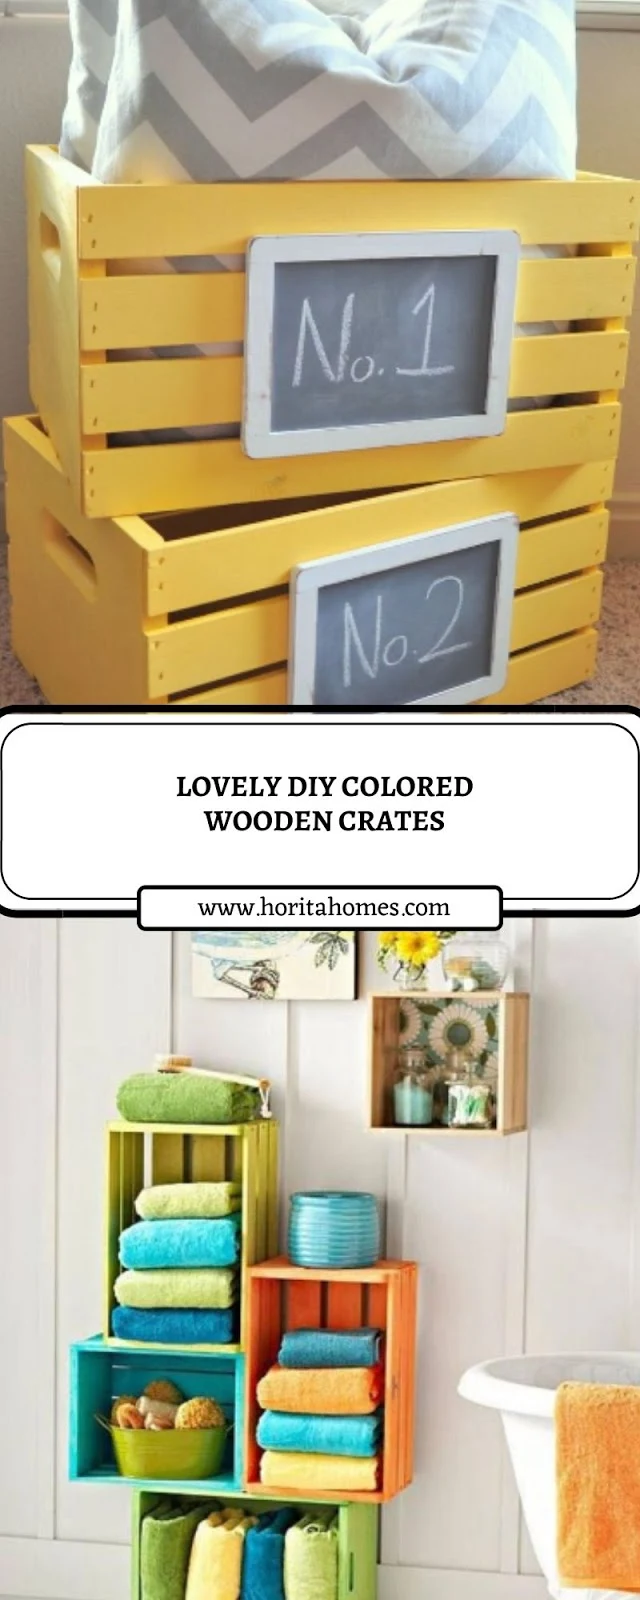 LOVELY DIY COLORED WOODEN CRATES